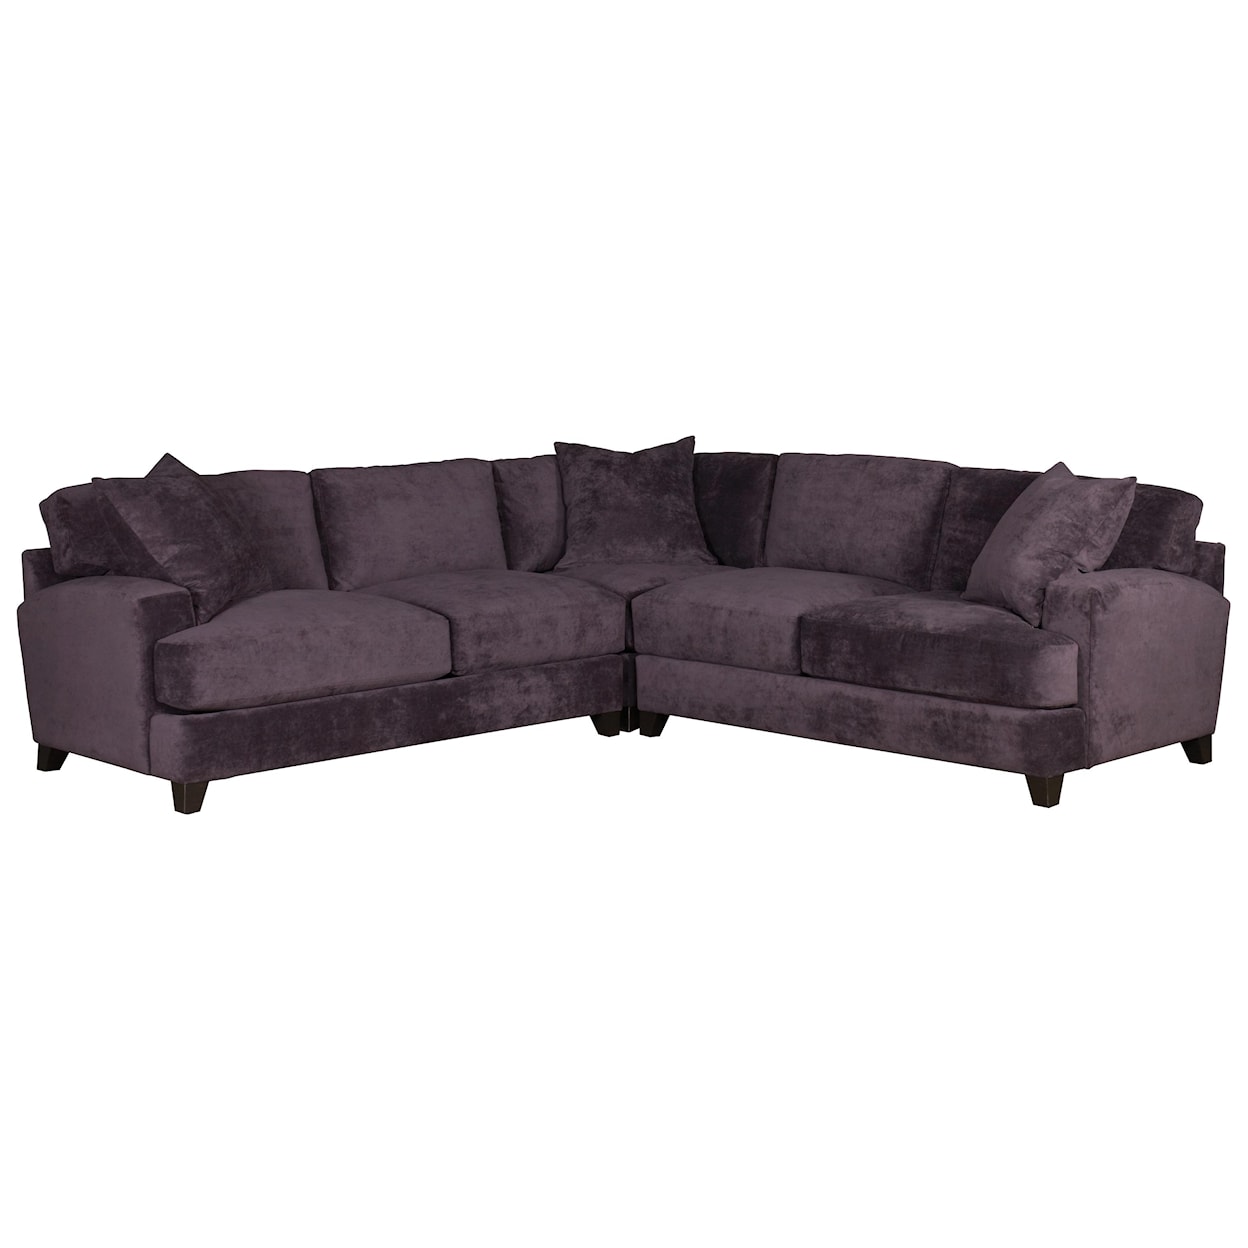 Jonathan Louis Clarence 3 pc. Sectional